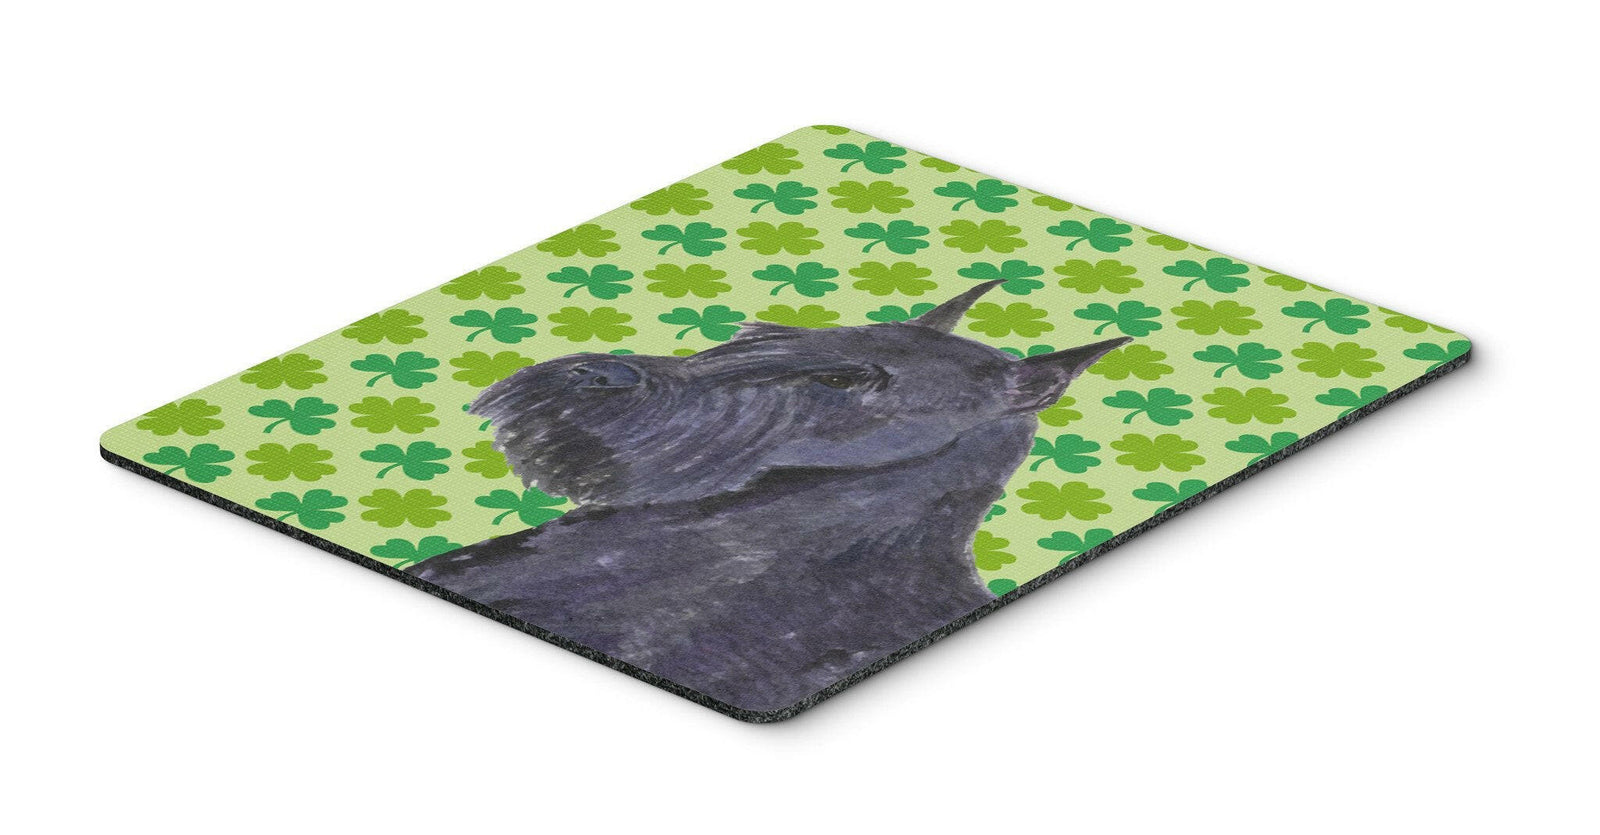 Schnauzer Giant St. Patrick's Day Shamrock Mouse Pad, Hot Pad or Trivet by Caroline's Treasures